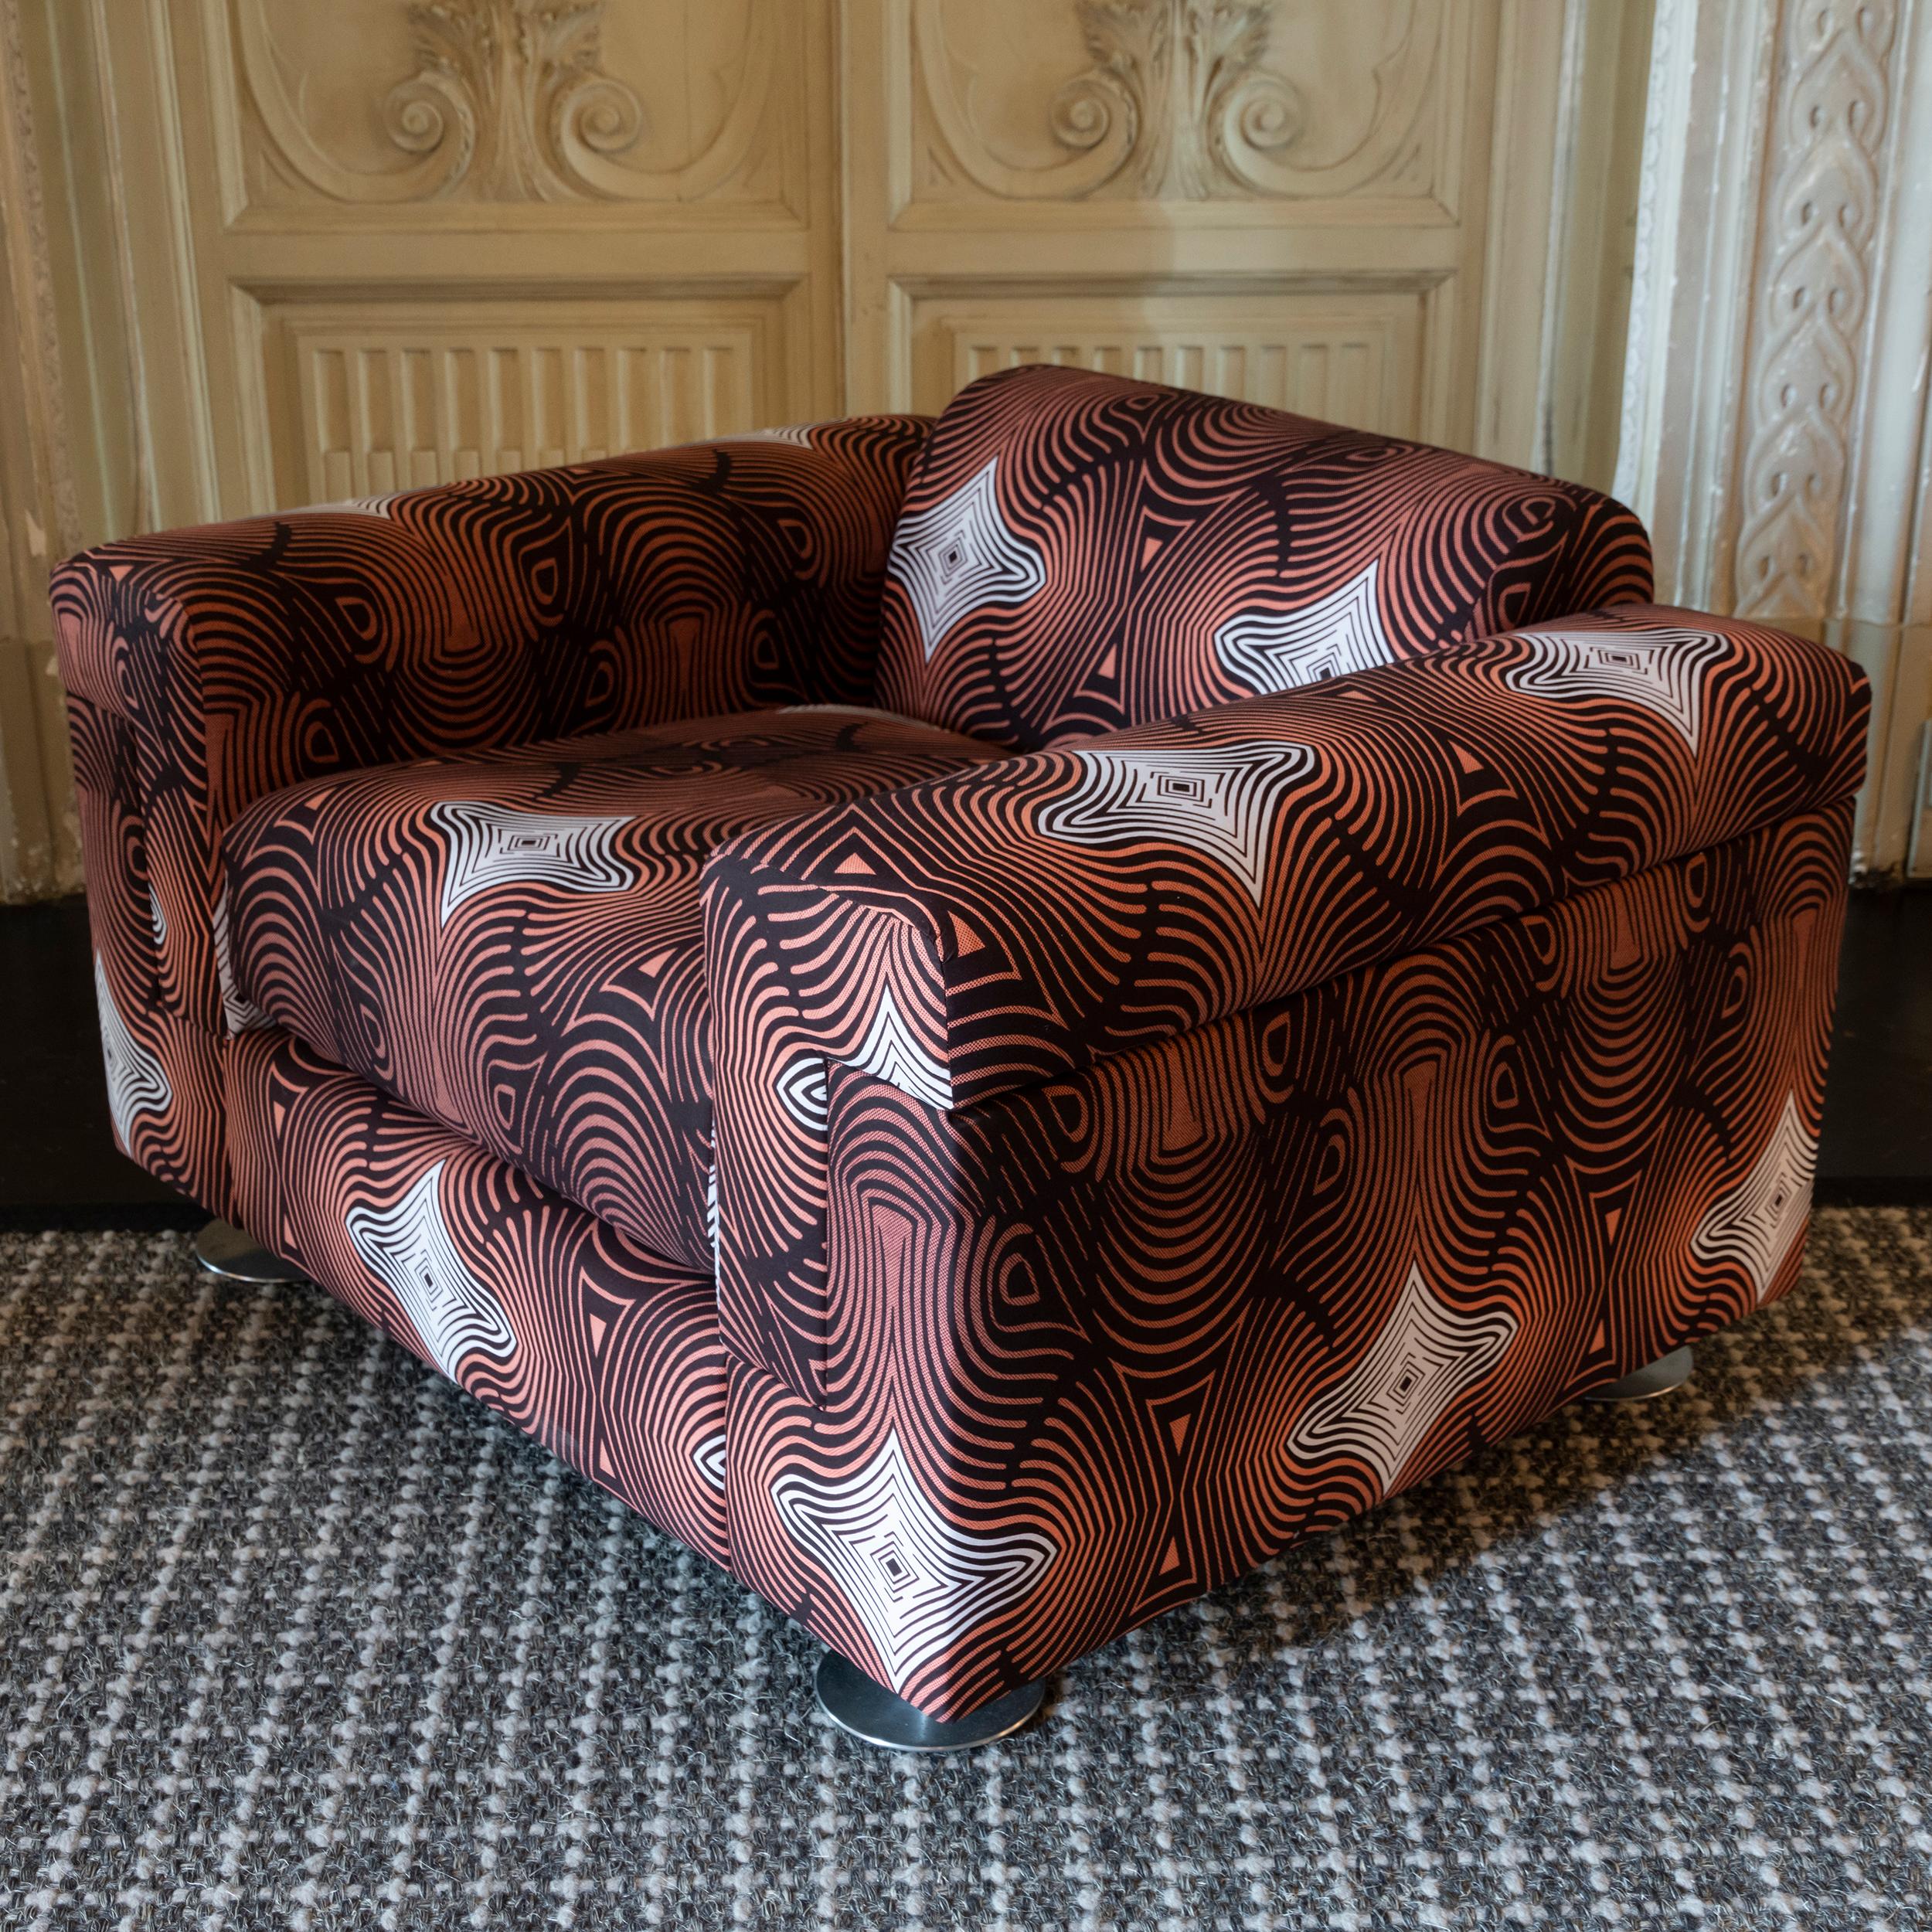 Pair of Tecno Armchairs Upholstered in Orange/Black Jacquard Fabric, Italy, 1966 For Sale 3